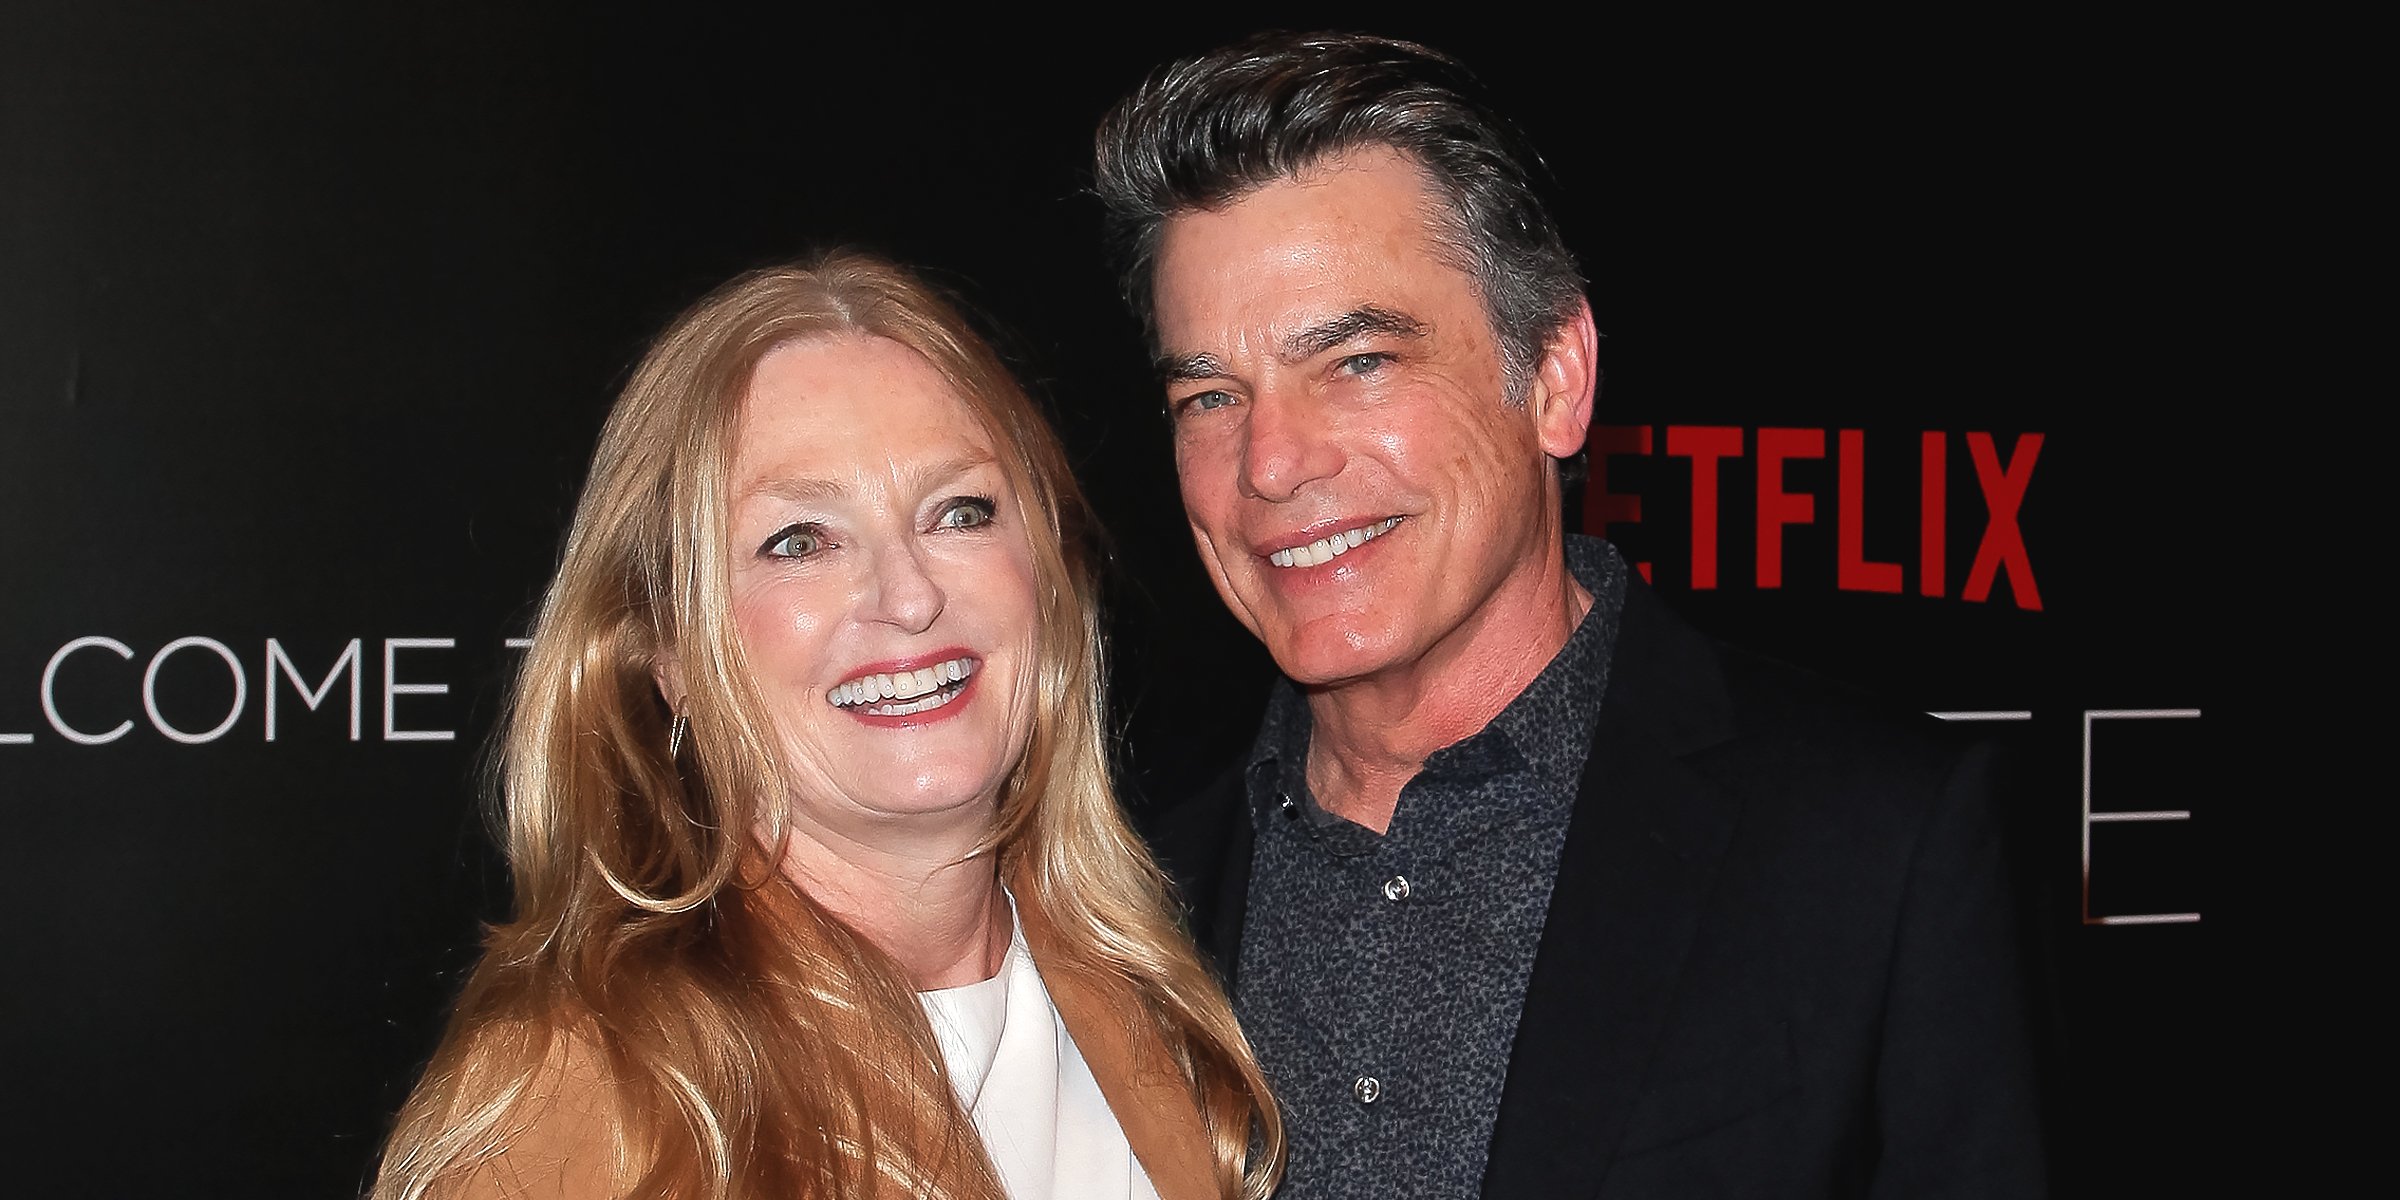 Paula Harwood and Peter Gallagher | Source: Getty Images